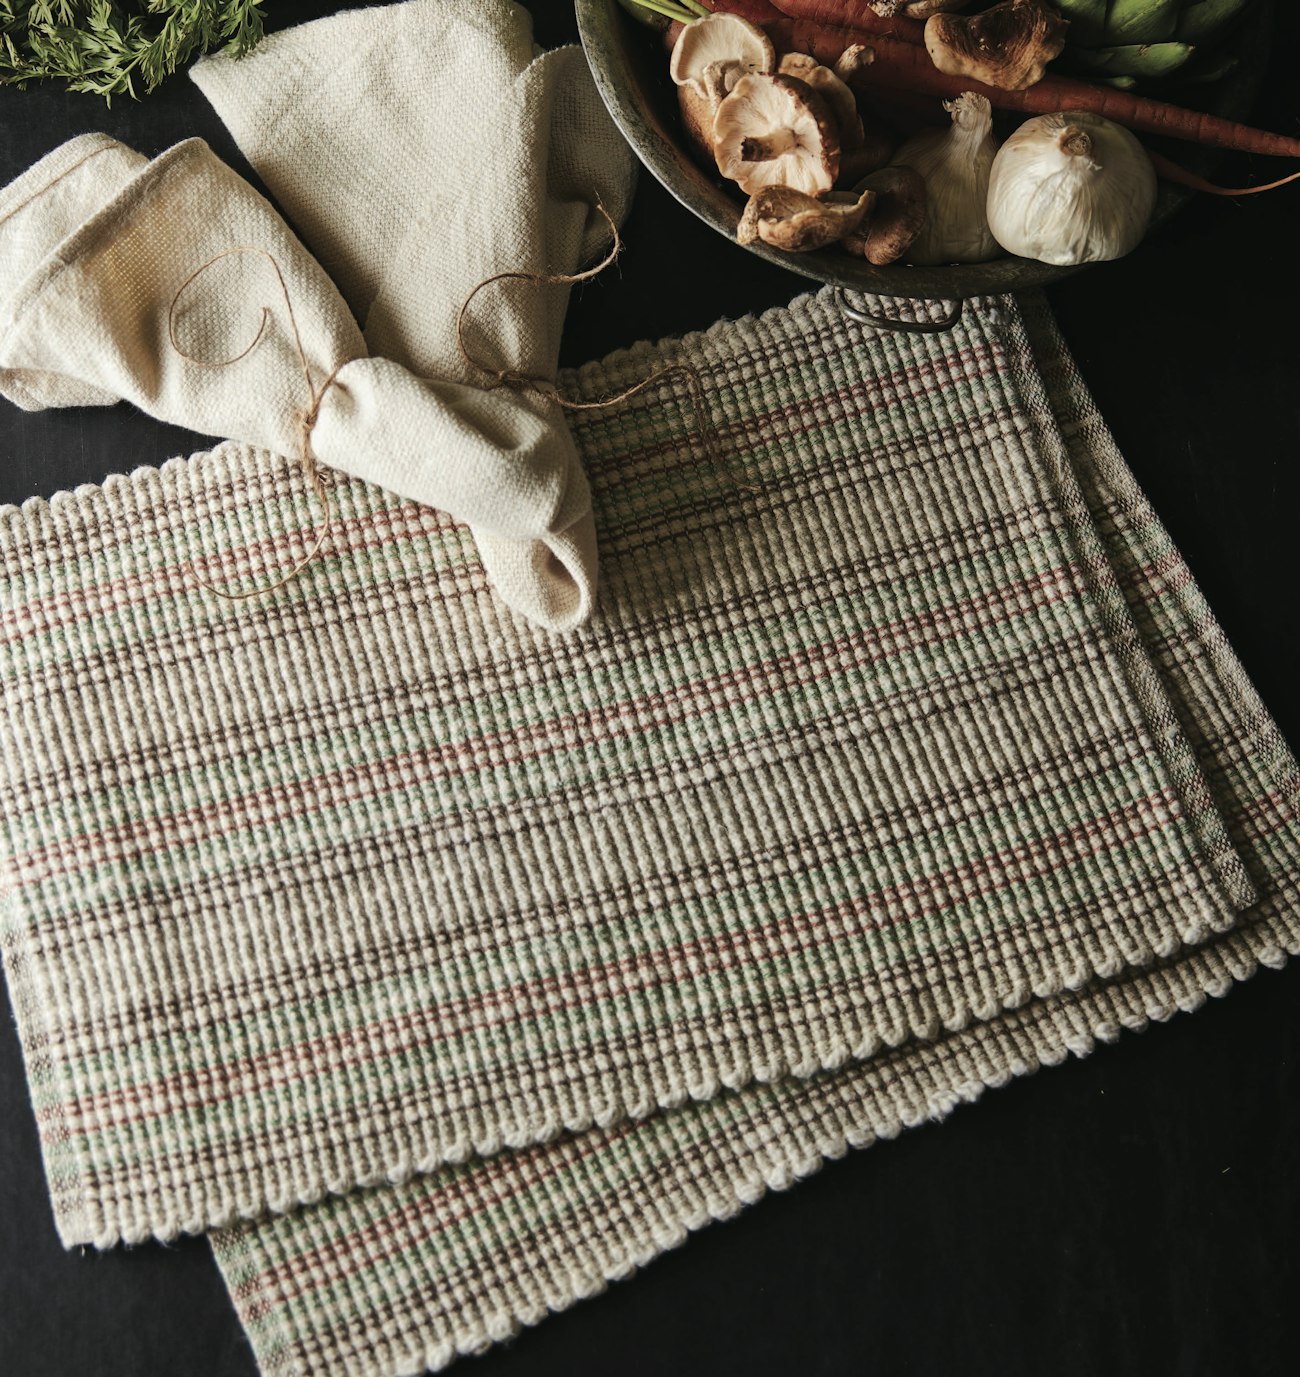 Beach House Placemats and Napkins by Jodi Ybarra. Photo by George Boe